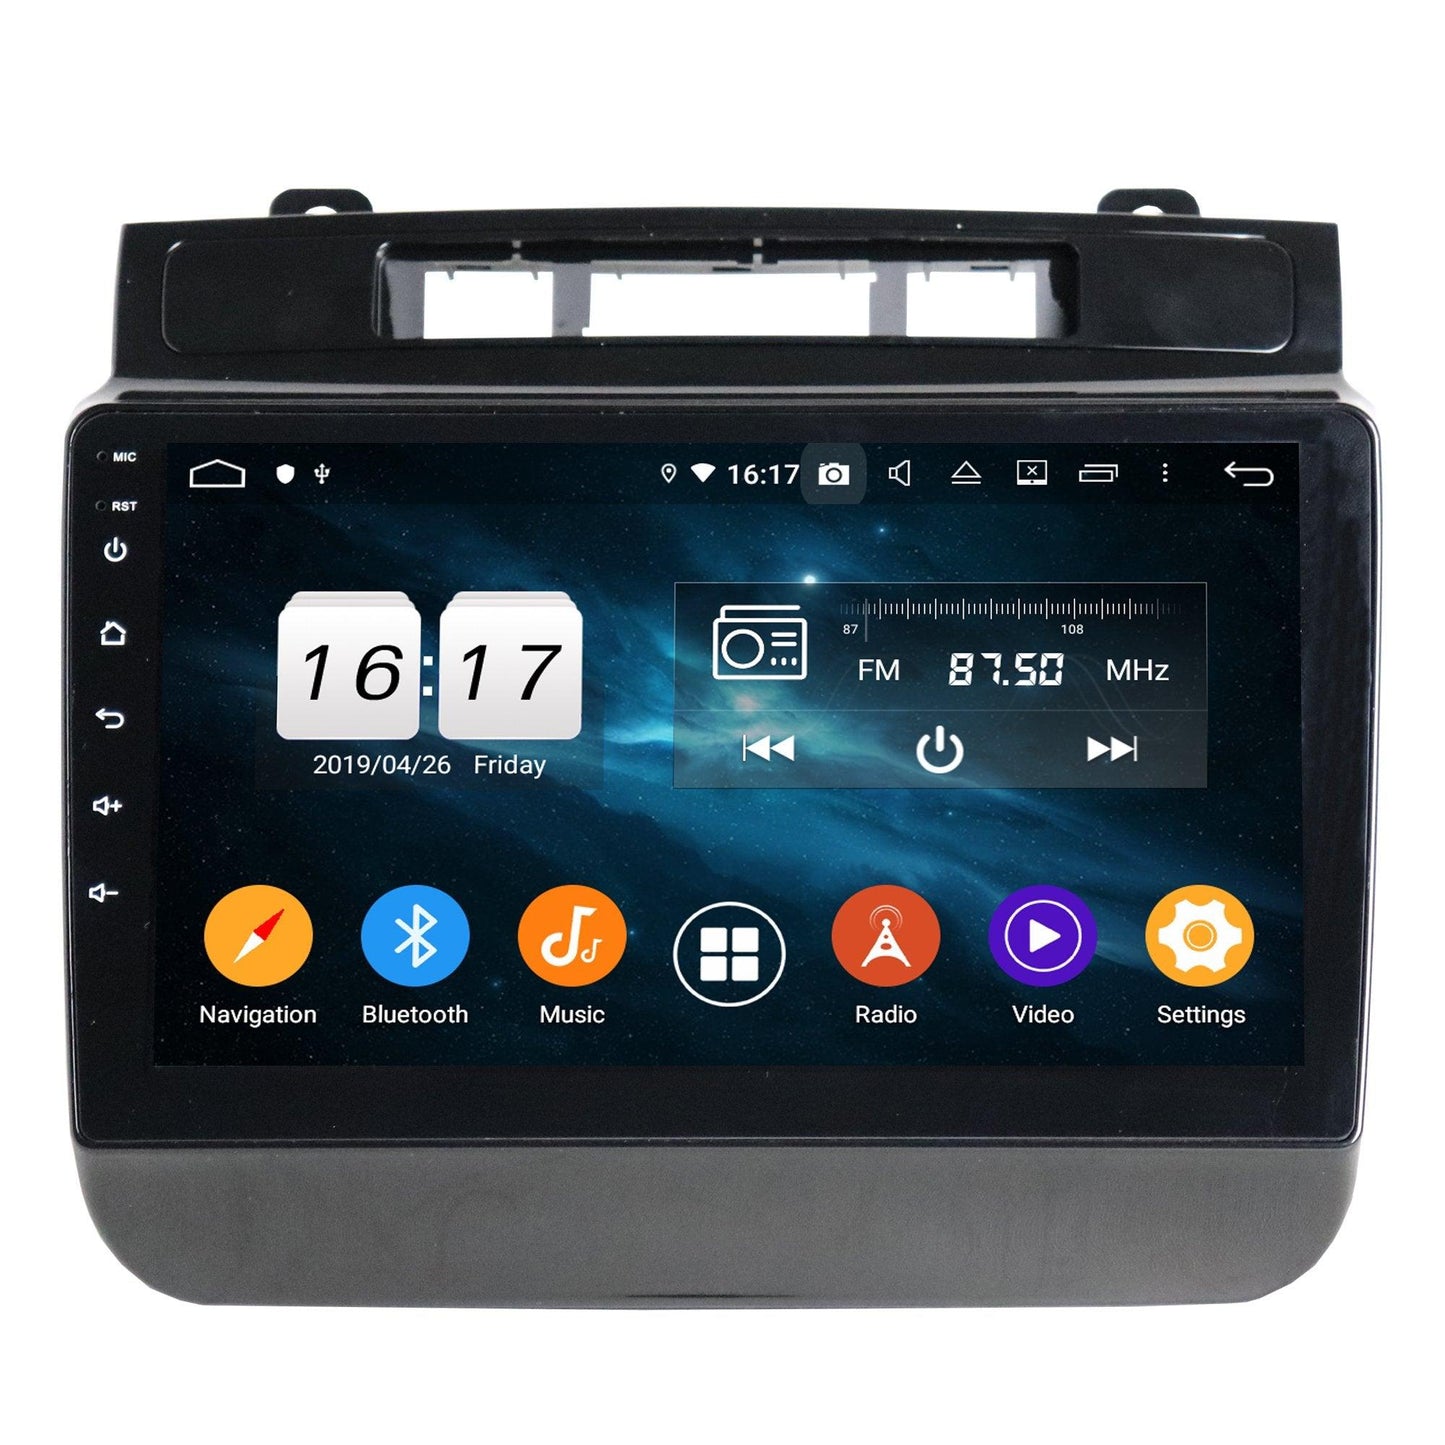 9" Octa-Core Android Navigation Radio for Vlokswagon CC 2011 - 2017 - Smart Car Stereo Radio Navigation | In-Dash audio/video players online - Phoenix Automotive